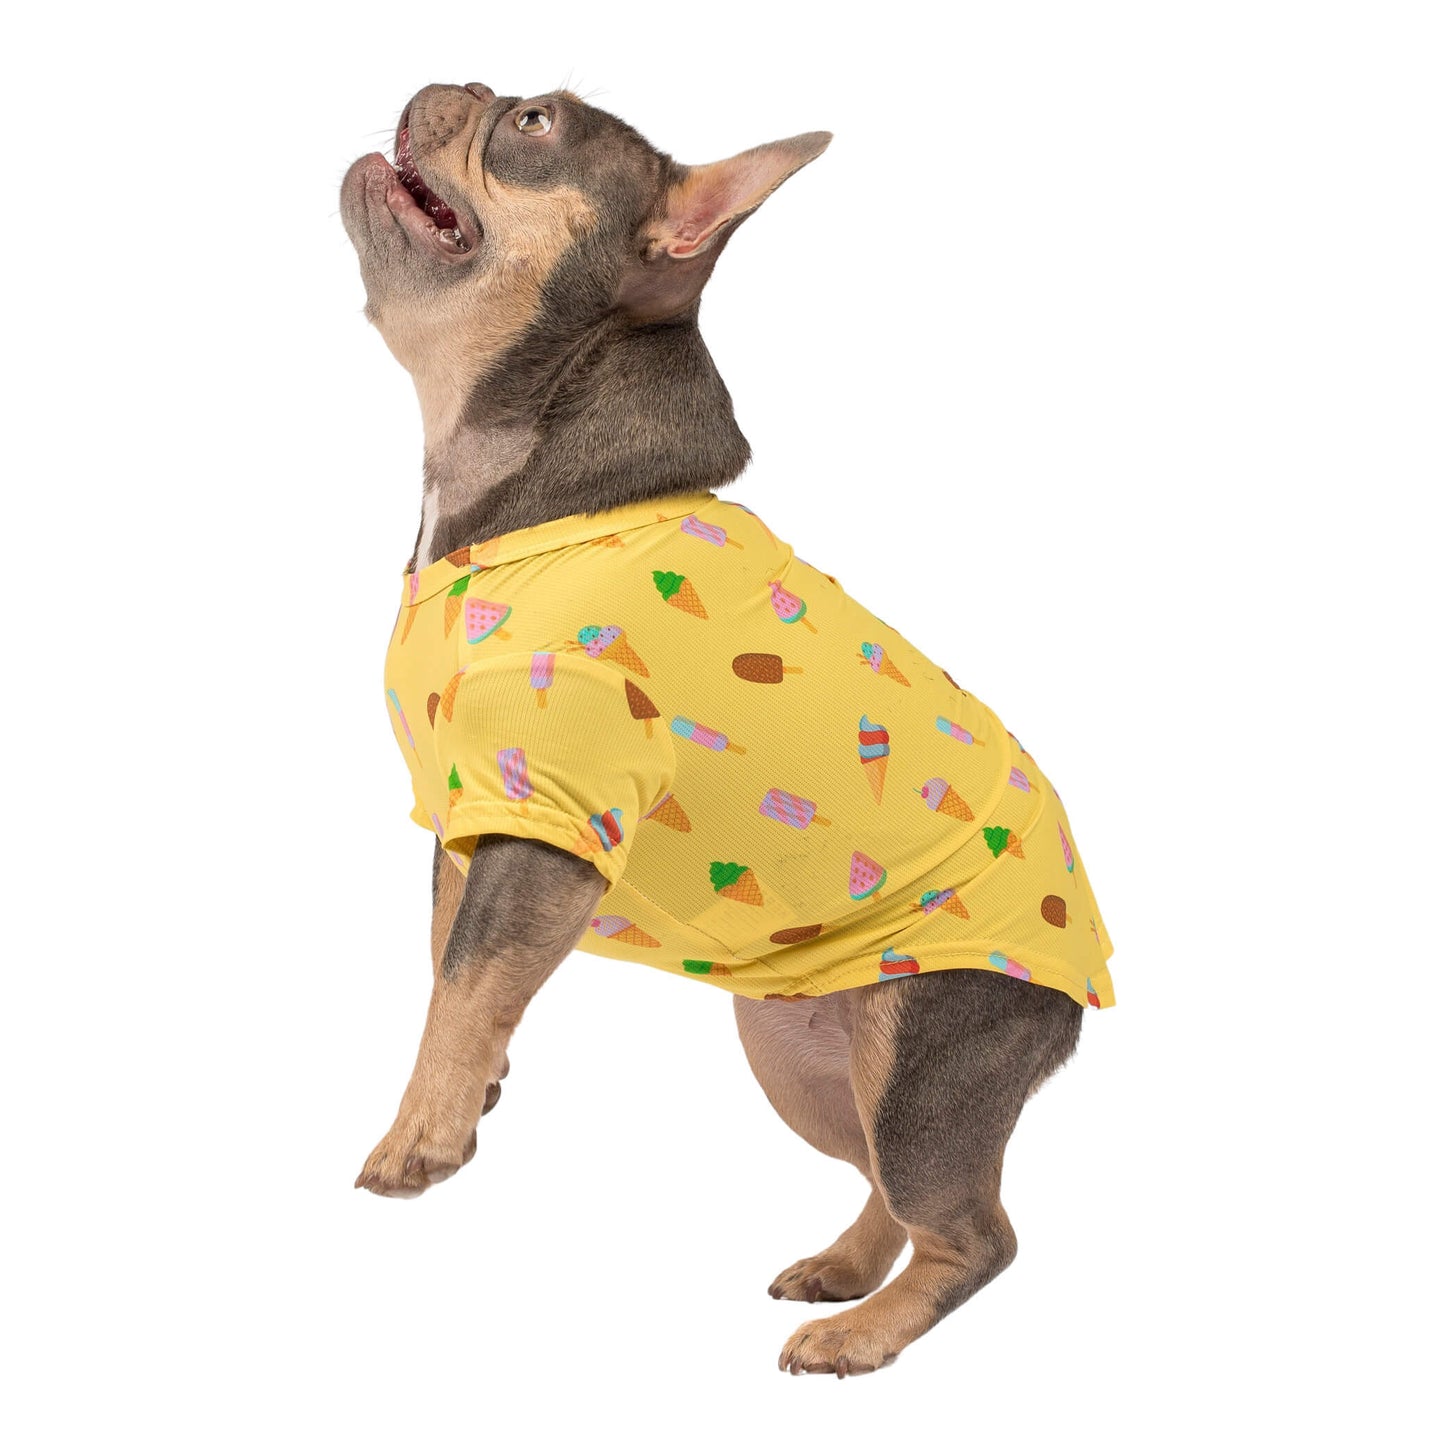 A French Bulldog standing on hind legs while Vibrant Hounds Ice-cream dream cooling shirt. The shirt is yellow with ice creams and ice blocks printed on it.